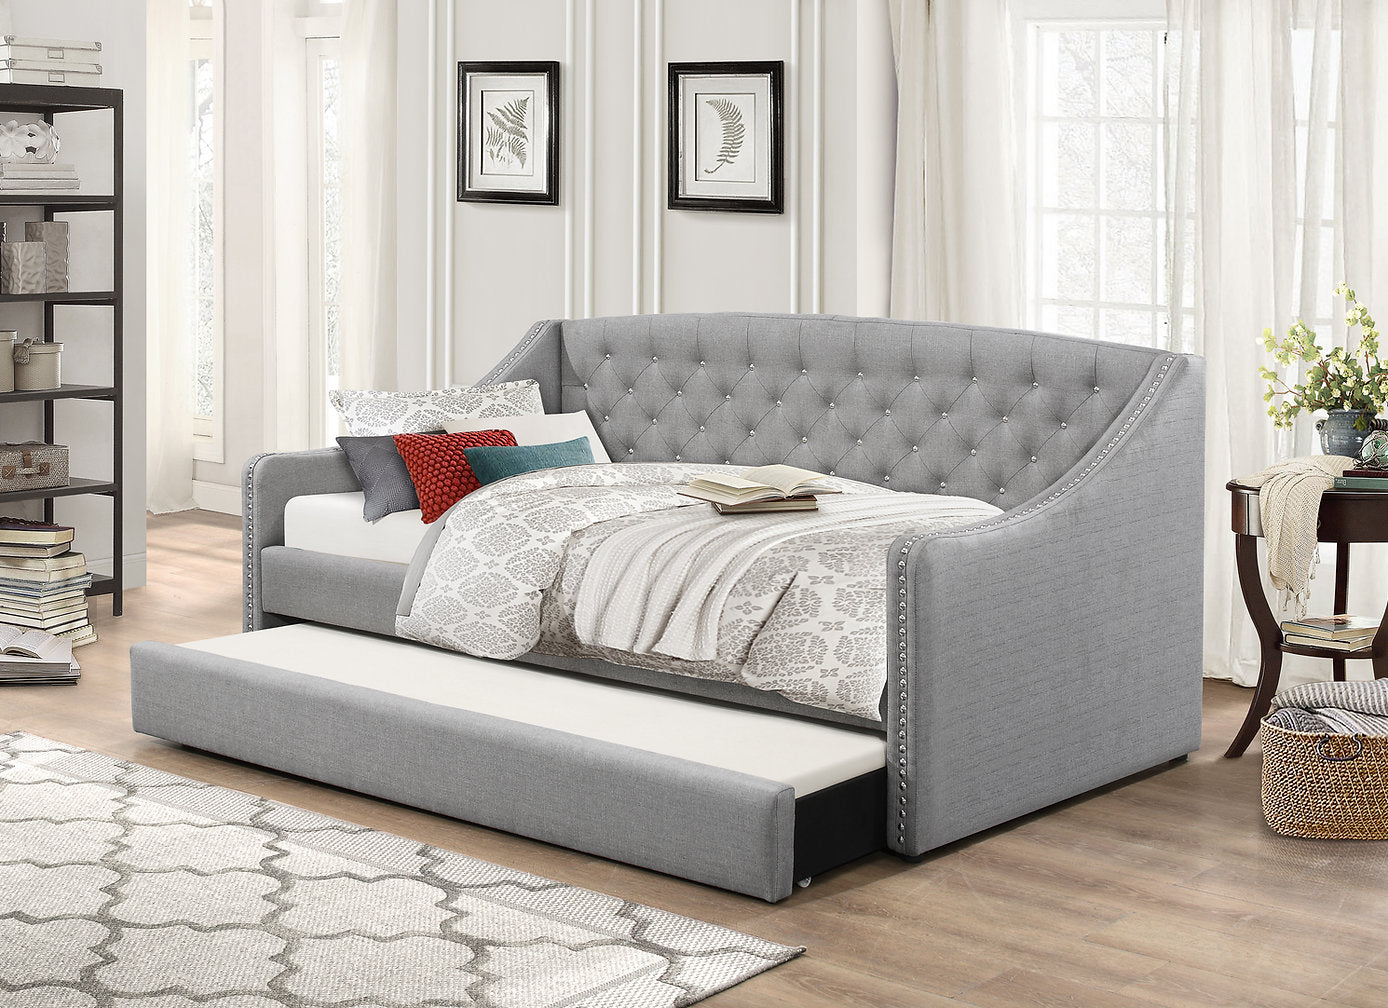 IF-308 - Grey Fabric Day Bed with Nailhead Accents and a Single Size Pull Out Trundle by International Furniture